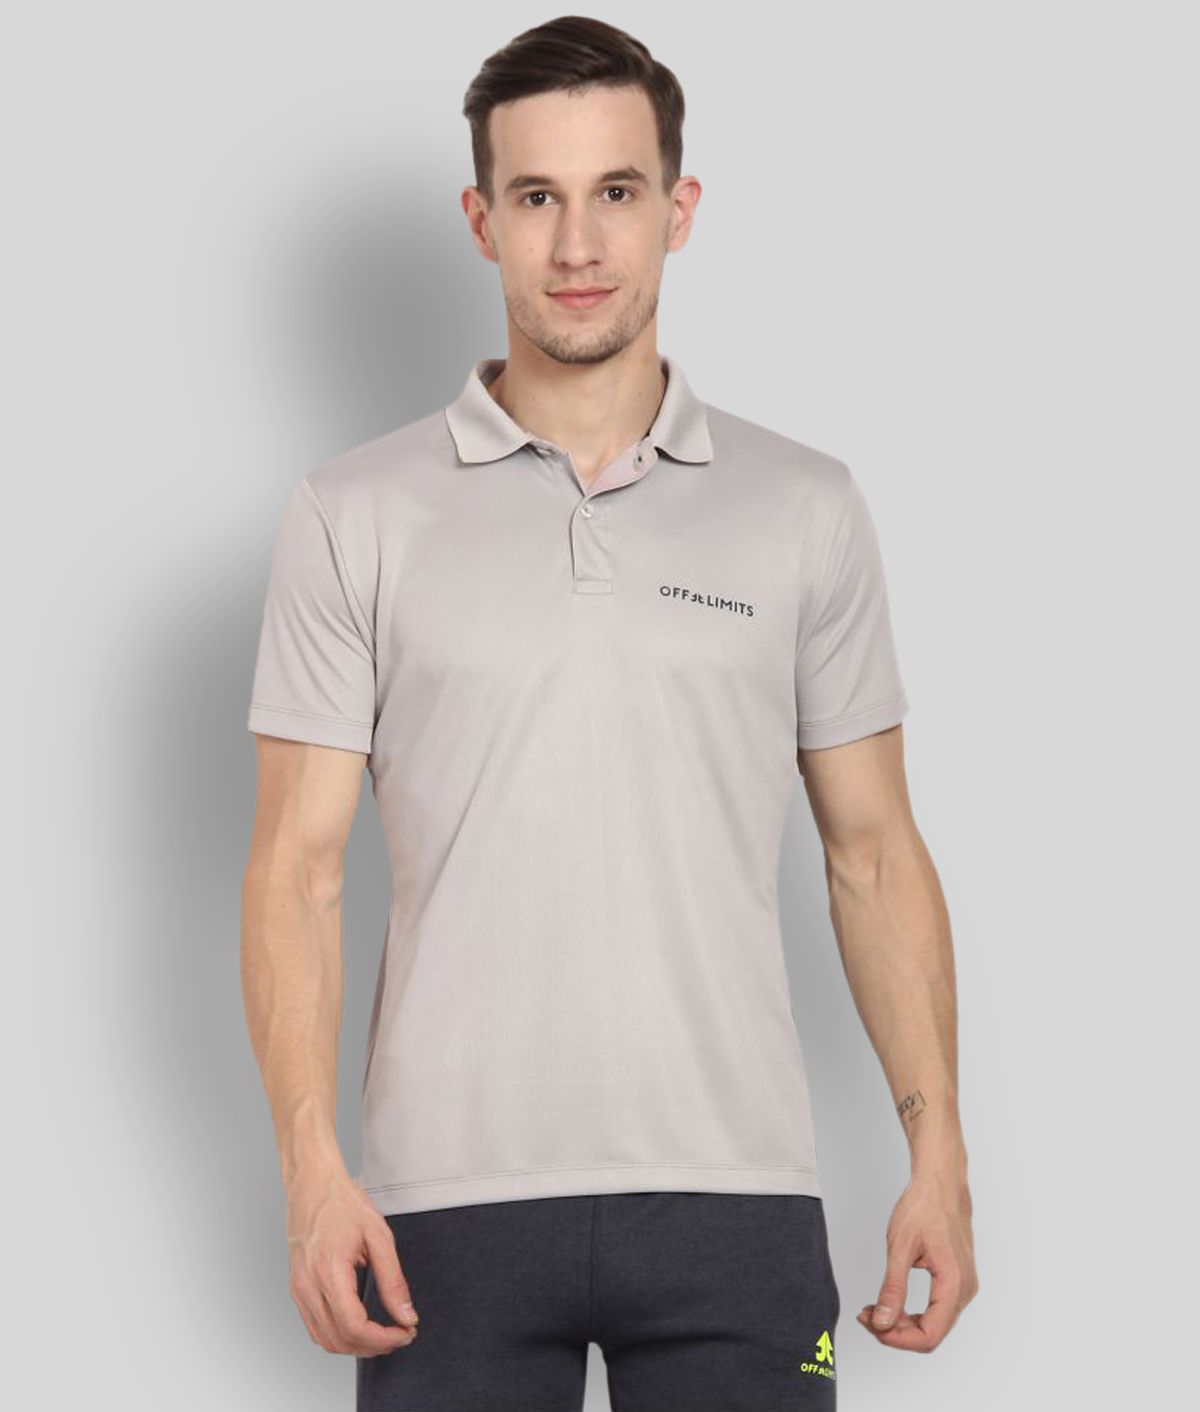     			OFF LIMITS - Light Grey Polyester Regular Fit Men's Sports Polo T-Shirt ( Pack of 1 )